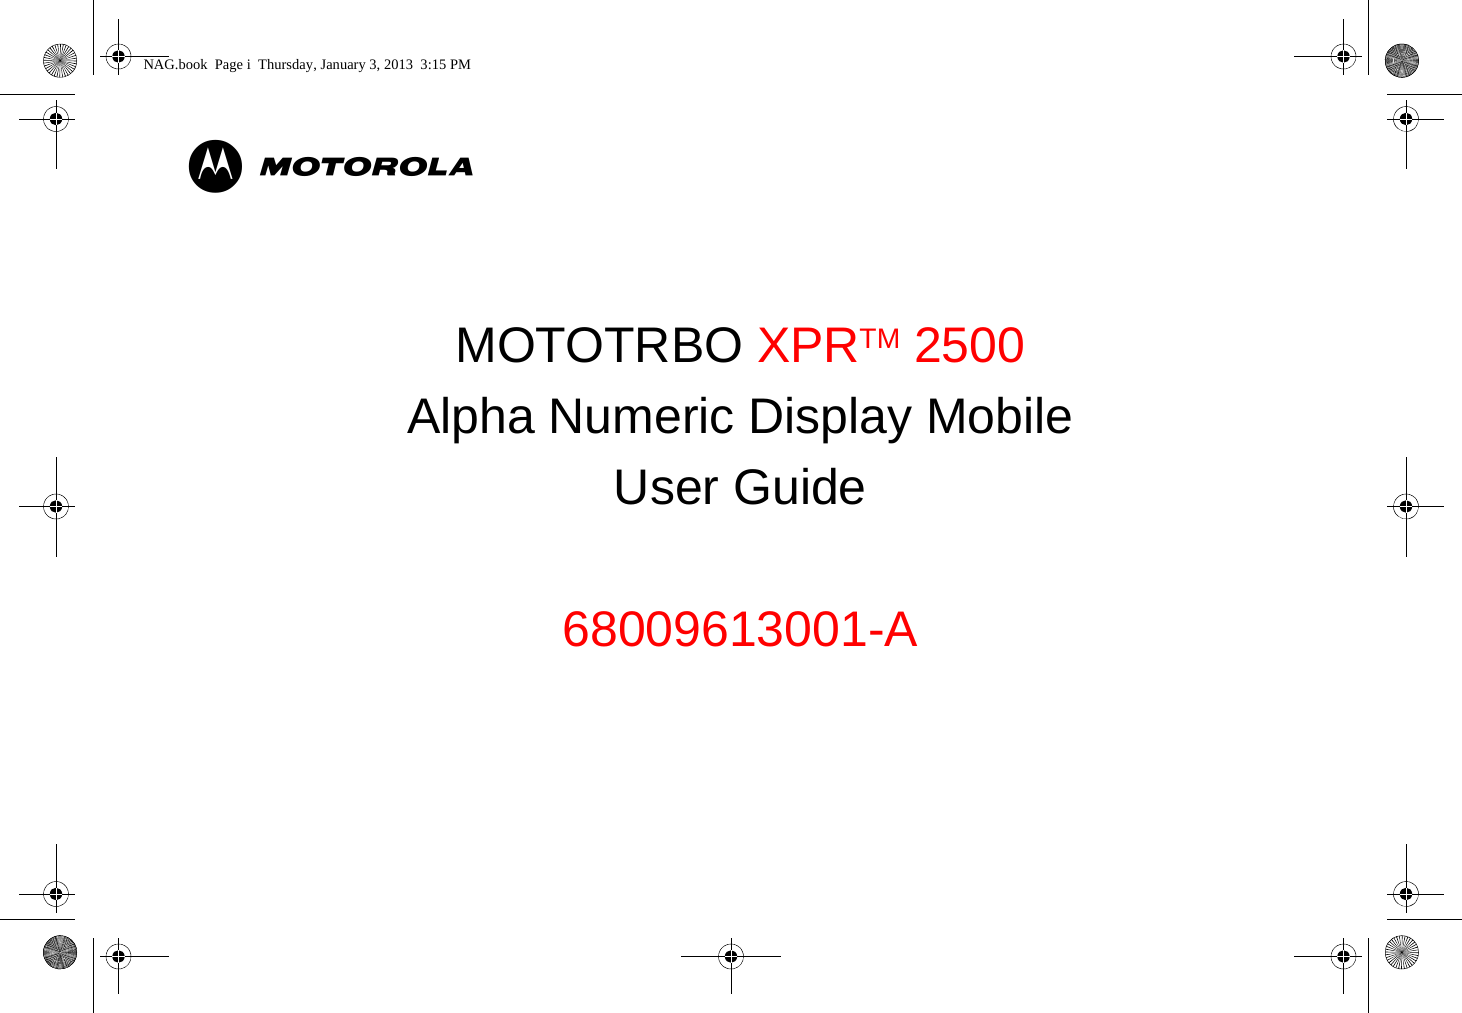 MMOTOTRBO XPRTM 2500Alpha Numeric Display MobileUser Guide68009613001-ANAG.book  Page i  Thursday, January 3, 2013  3:15 PM